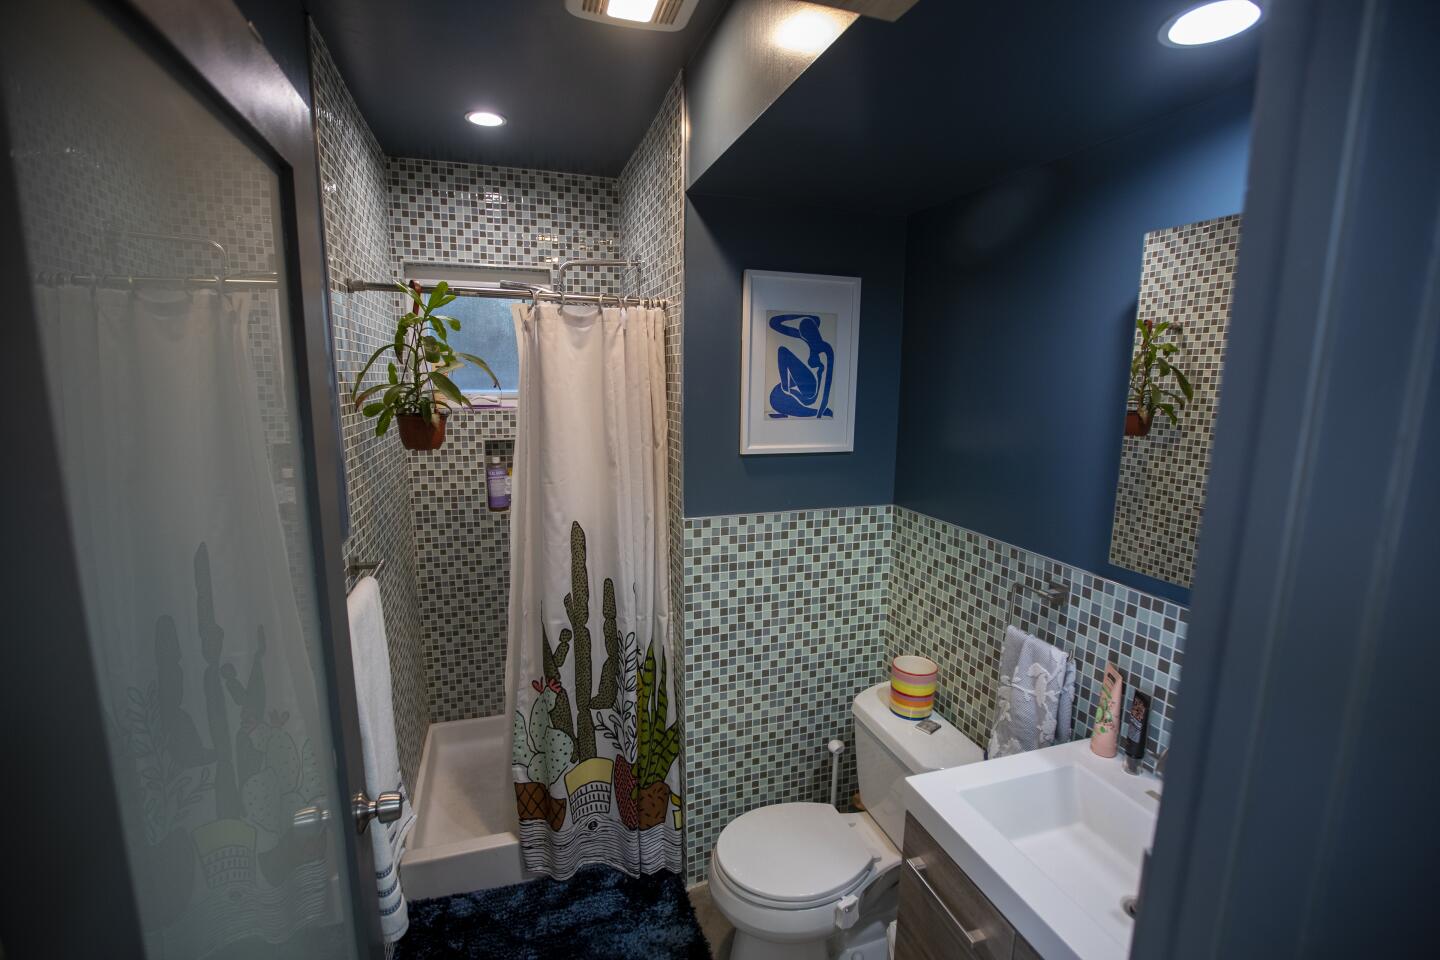 A small bath with shower, rectangular vanity and mirror . Small tile reaches halfway up the walls.